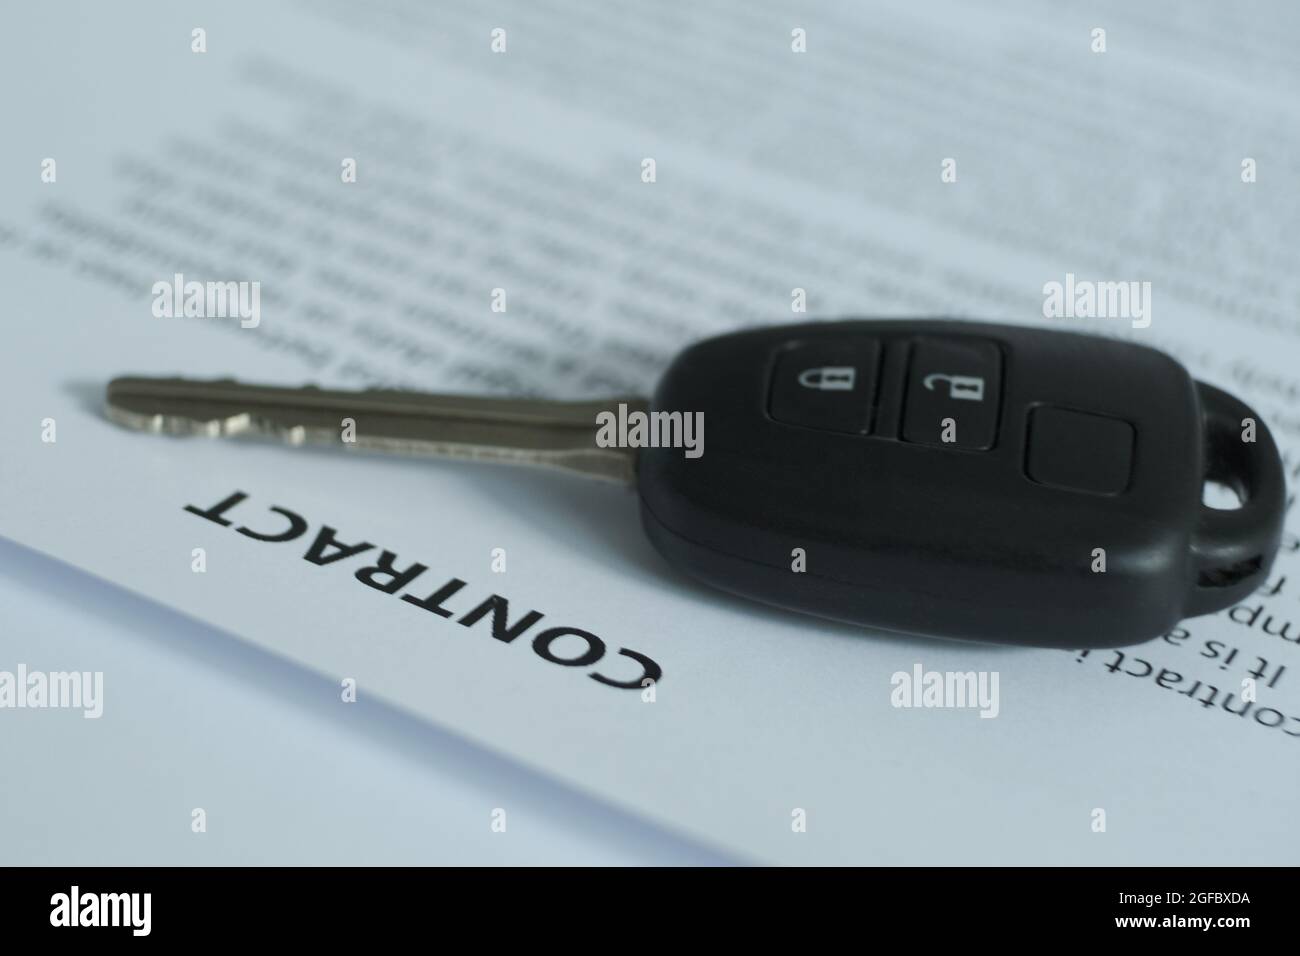 There is a contract and car keys on the table, the emphasis is on the name of the document and the keys.  Blurred image. Stock Photo